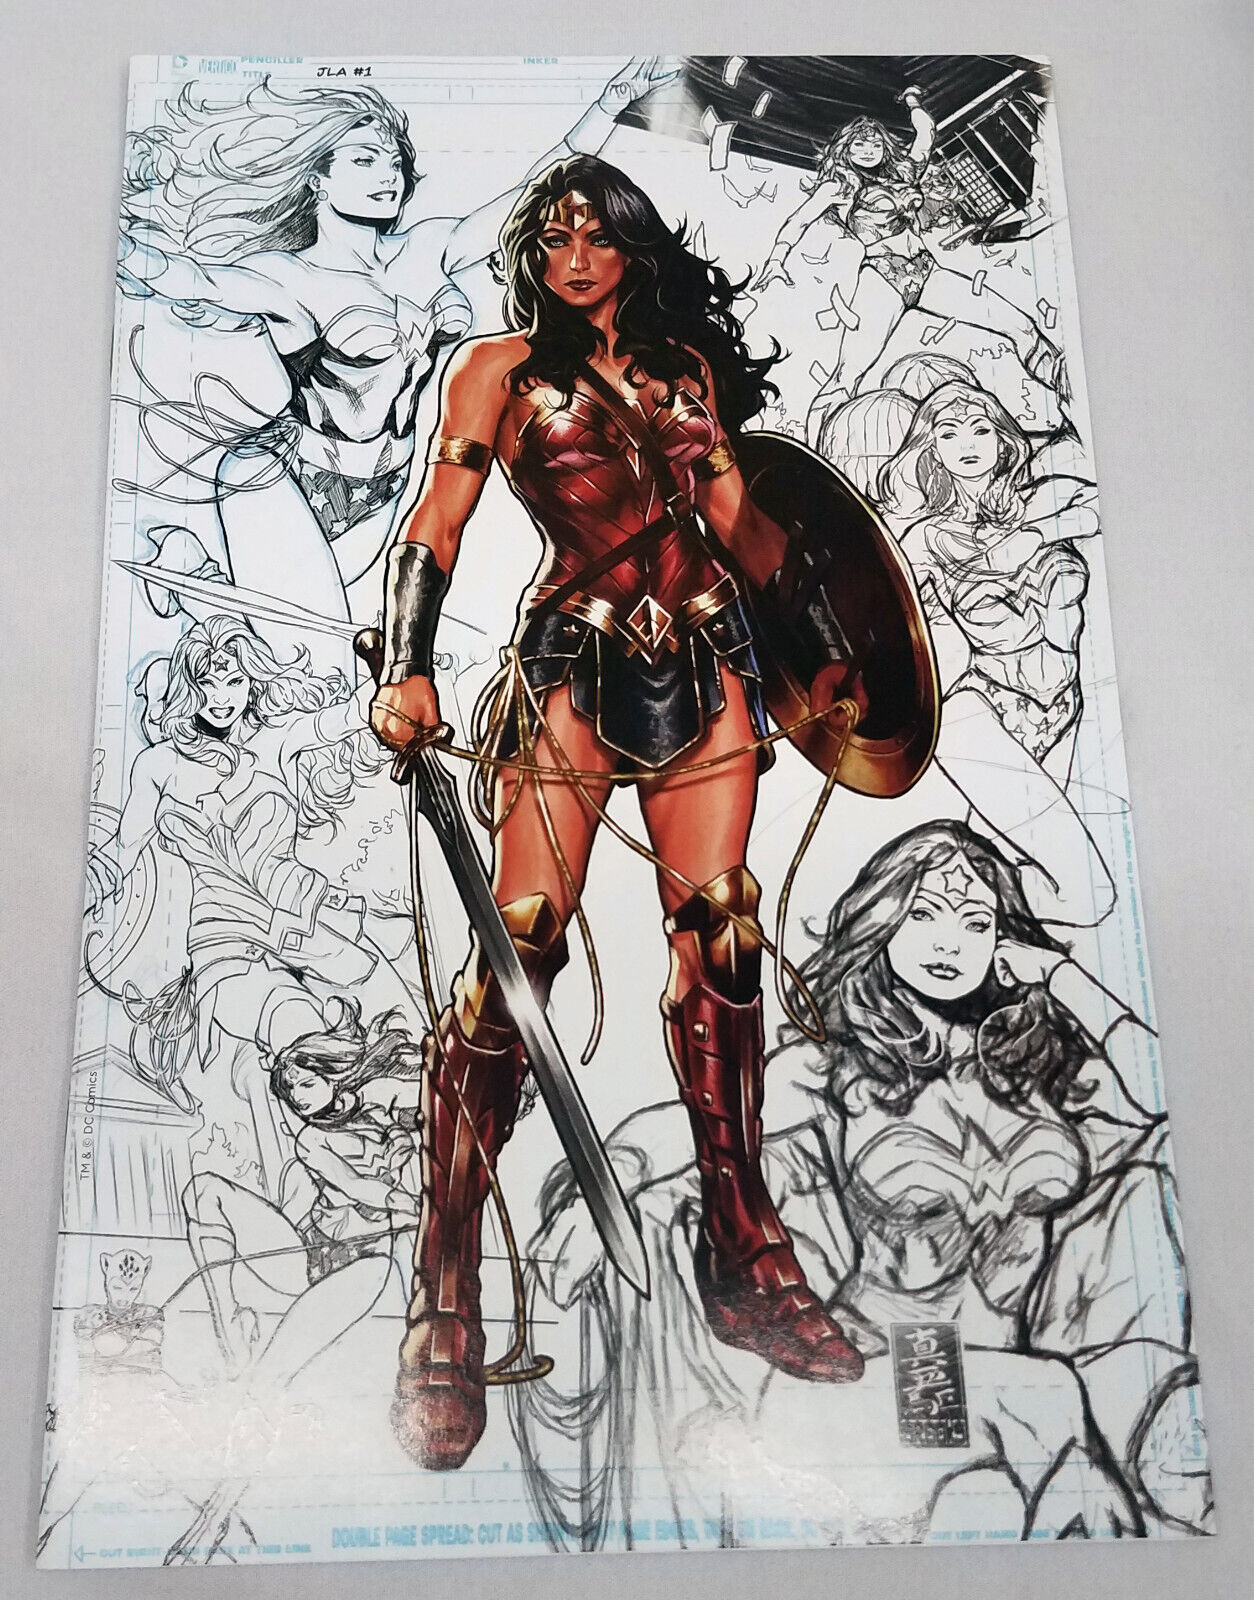 JUSTICE LEAGUE #1 Partial Sketch Wonder Woman Variant by Mark Brooks